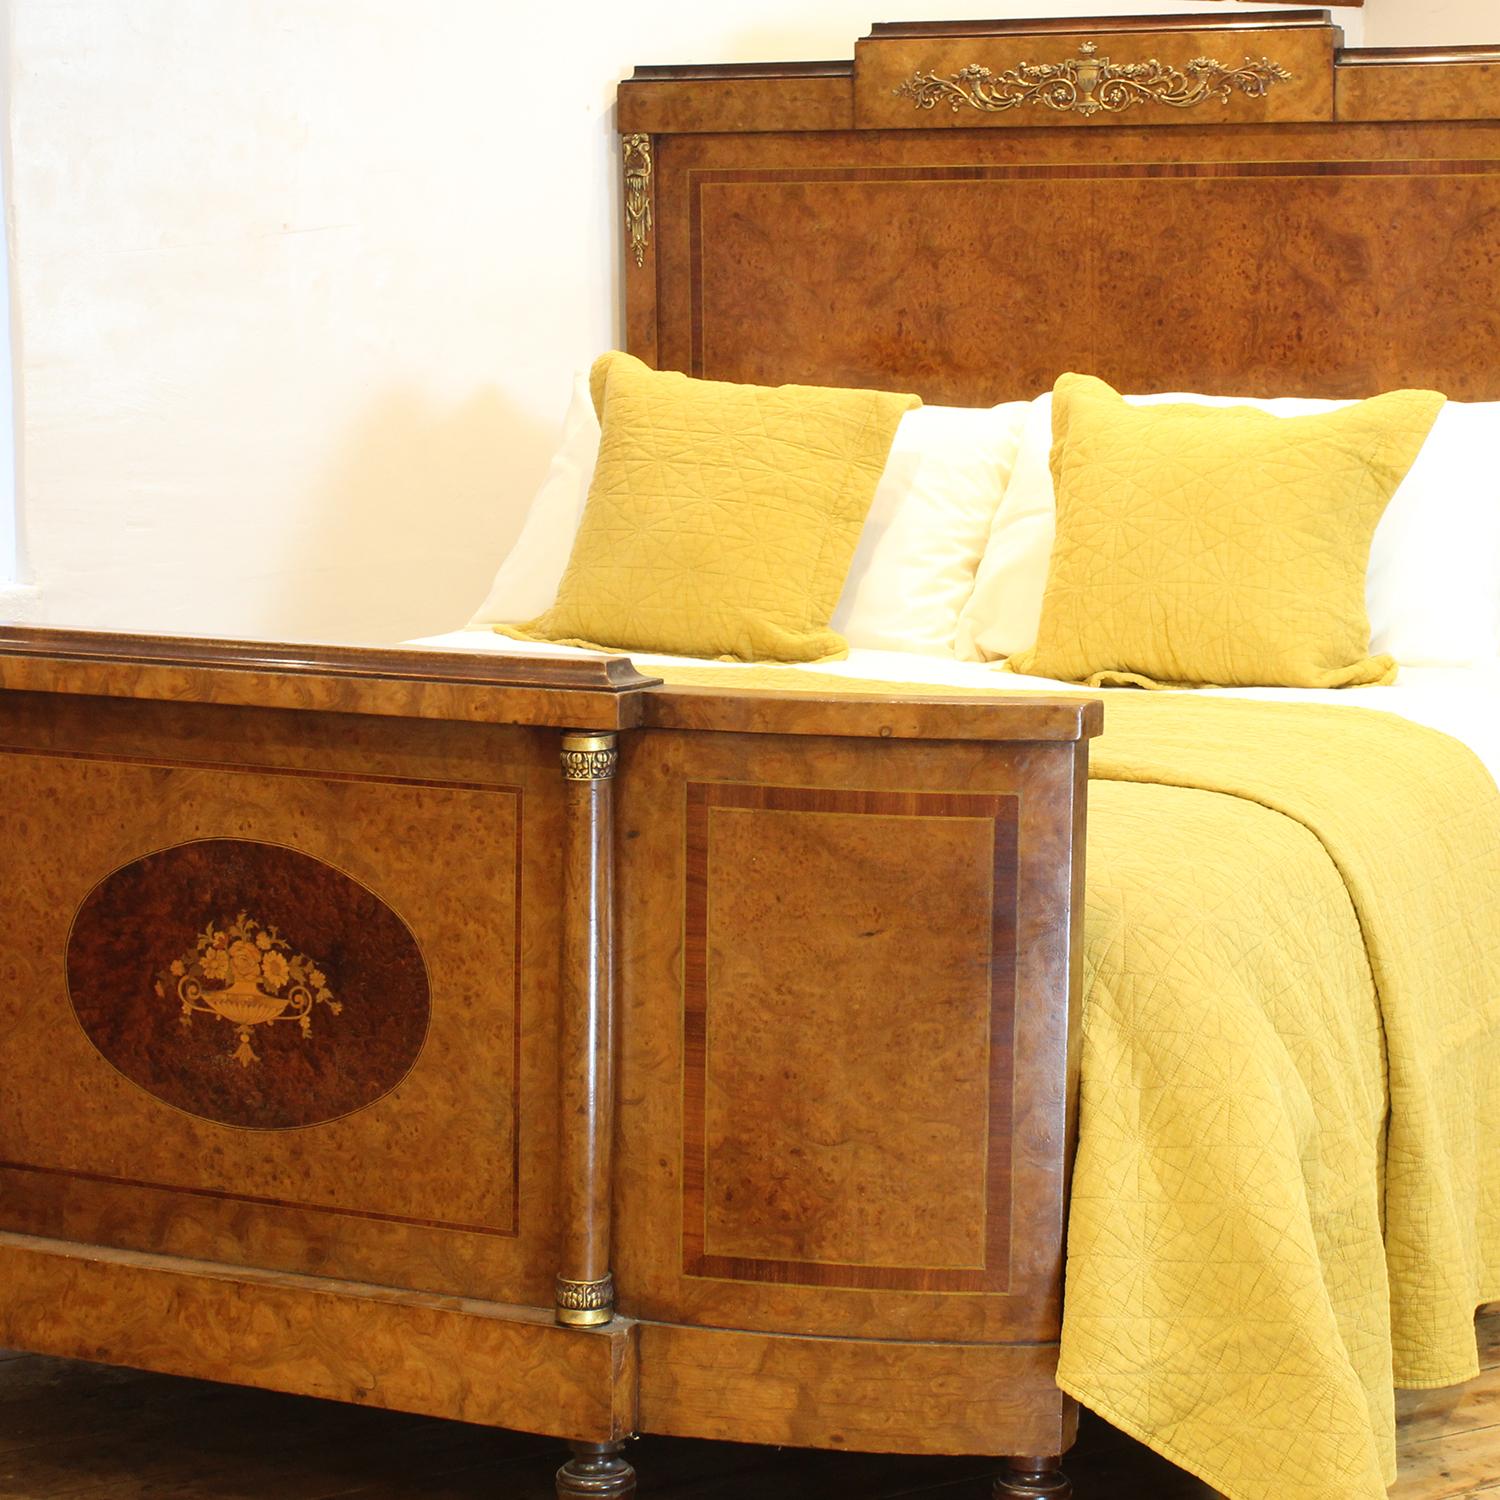 A fine antique bed with burr walnut panels and fruitwood inlay with bow foot, ormolu decoration and inlay feature of basket of flowers in the foot panel.

This bed accepts a British king size or American queen size, 5ft wide (60 inches or 150cm)